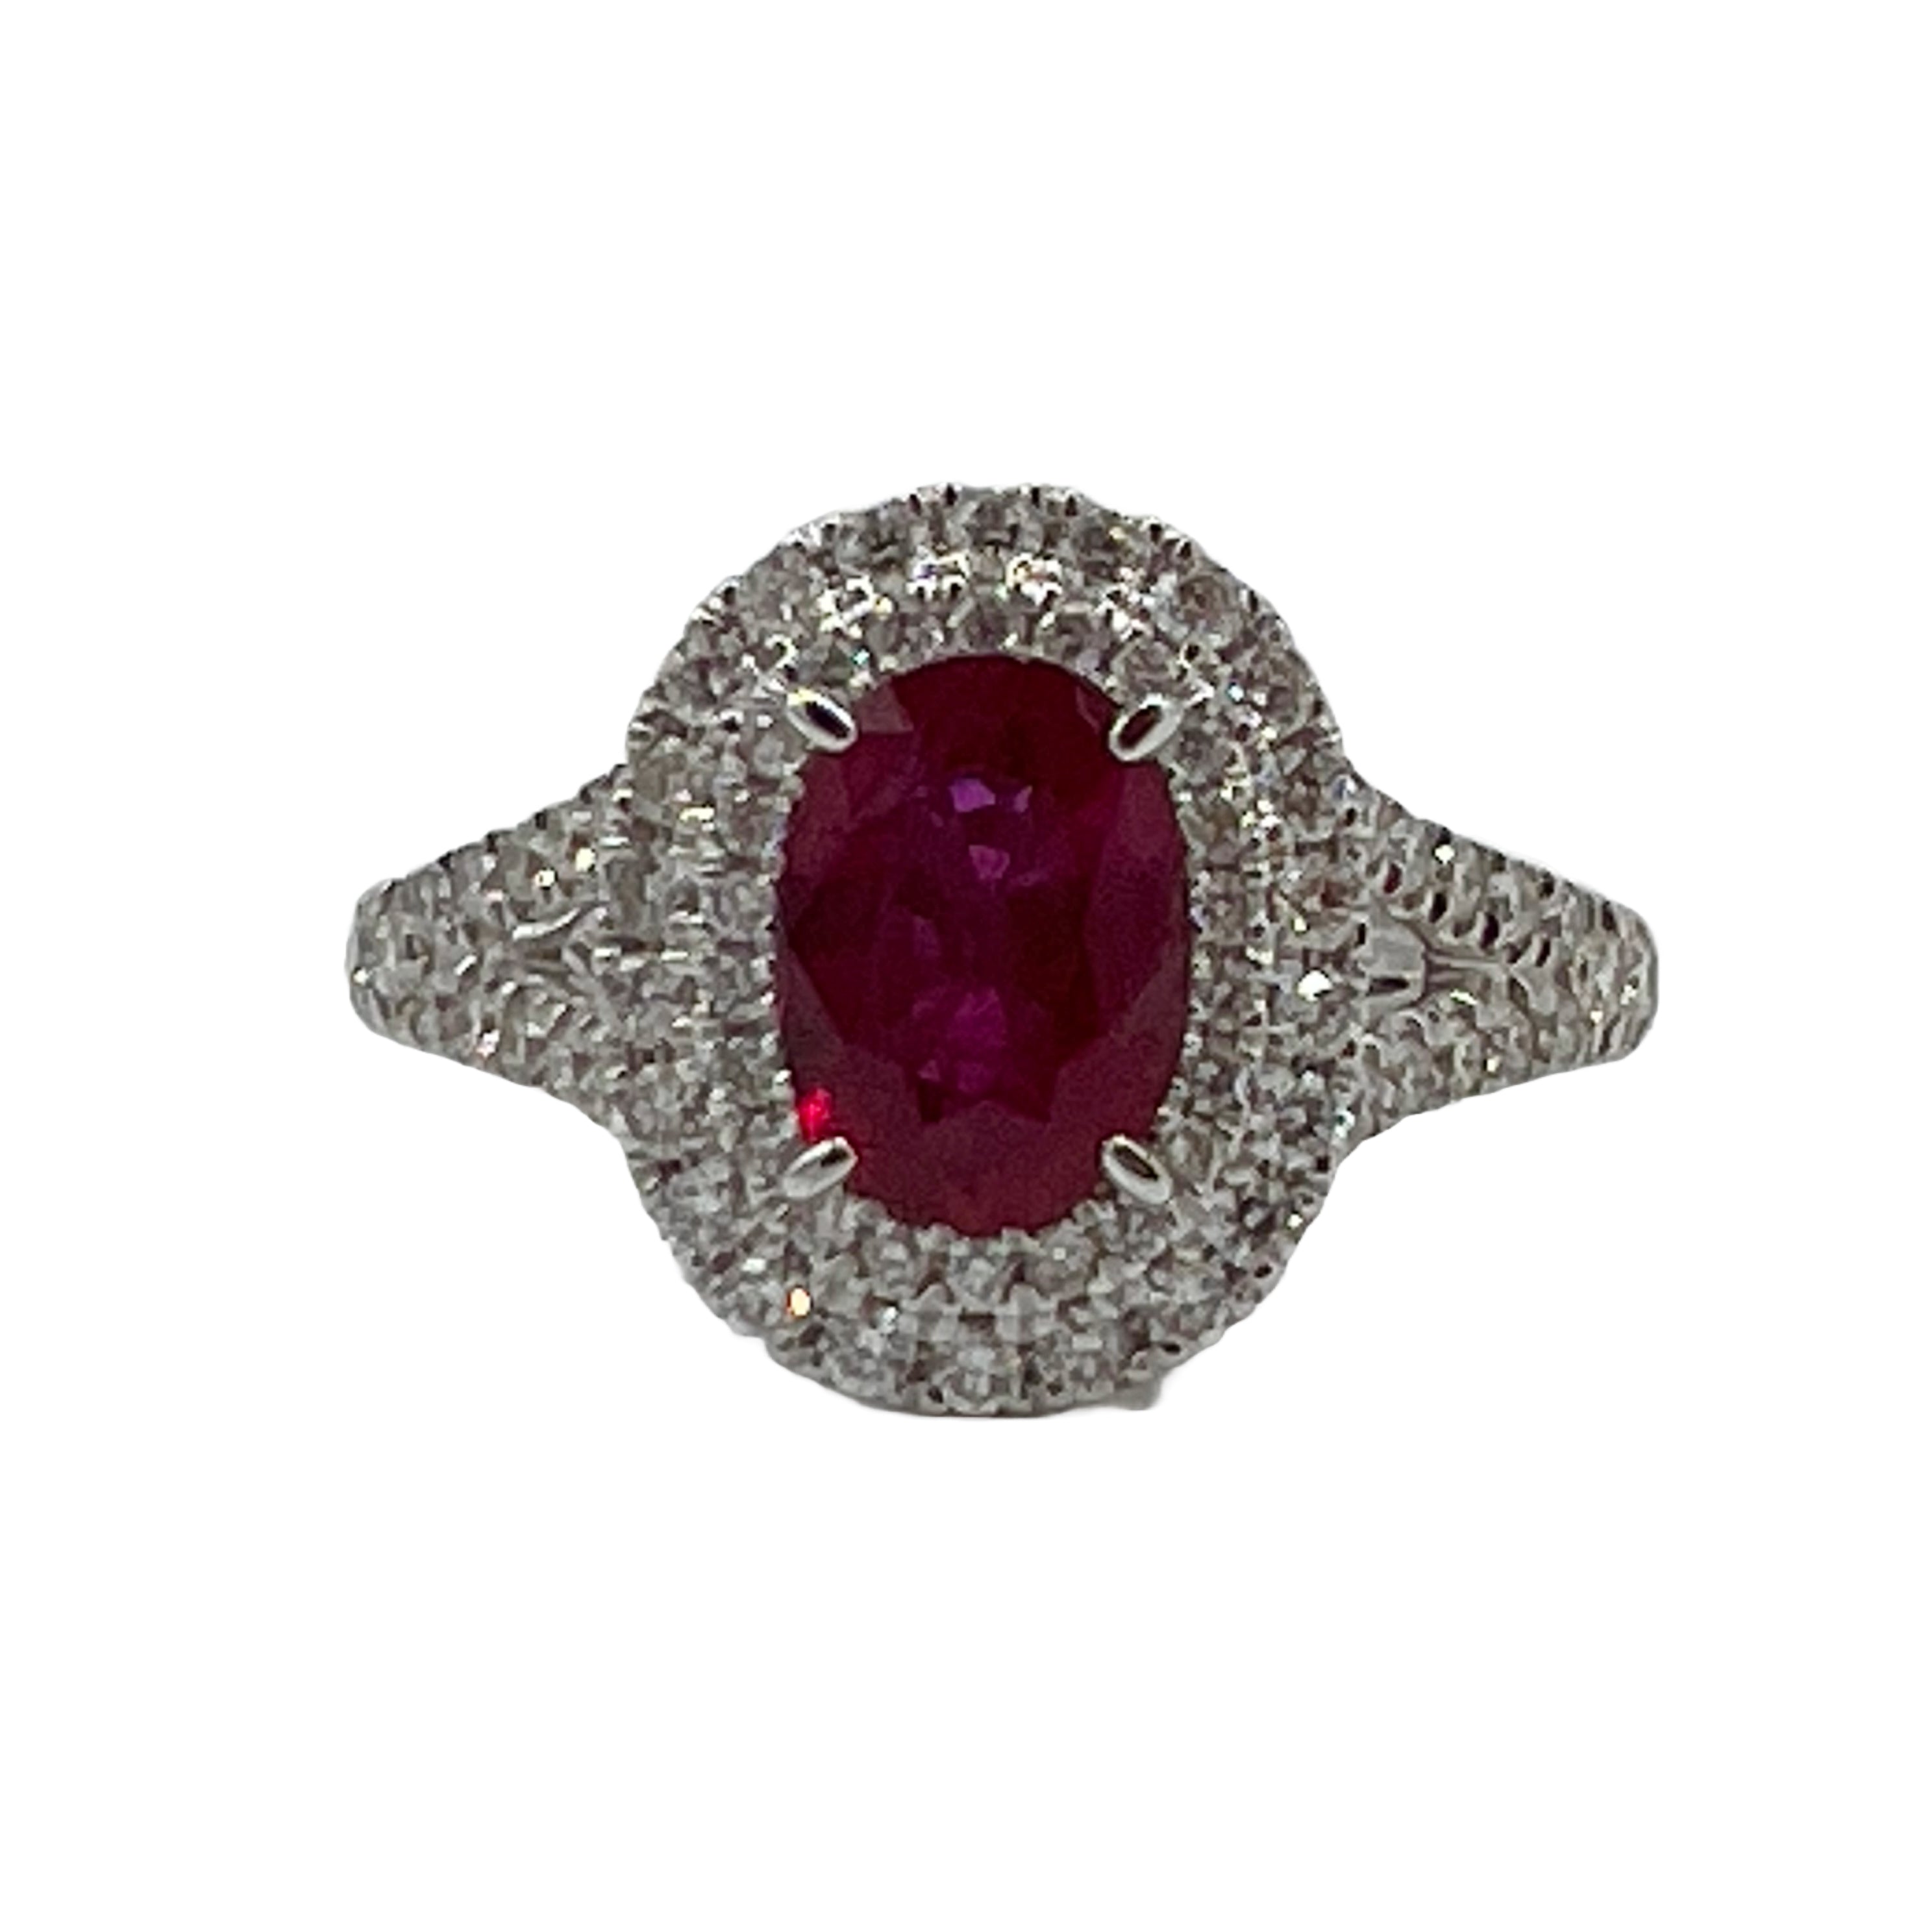 Ring 18KW/4.1G 1RUBY-1.14CT 72RD-0.58CT